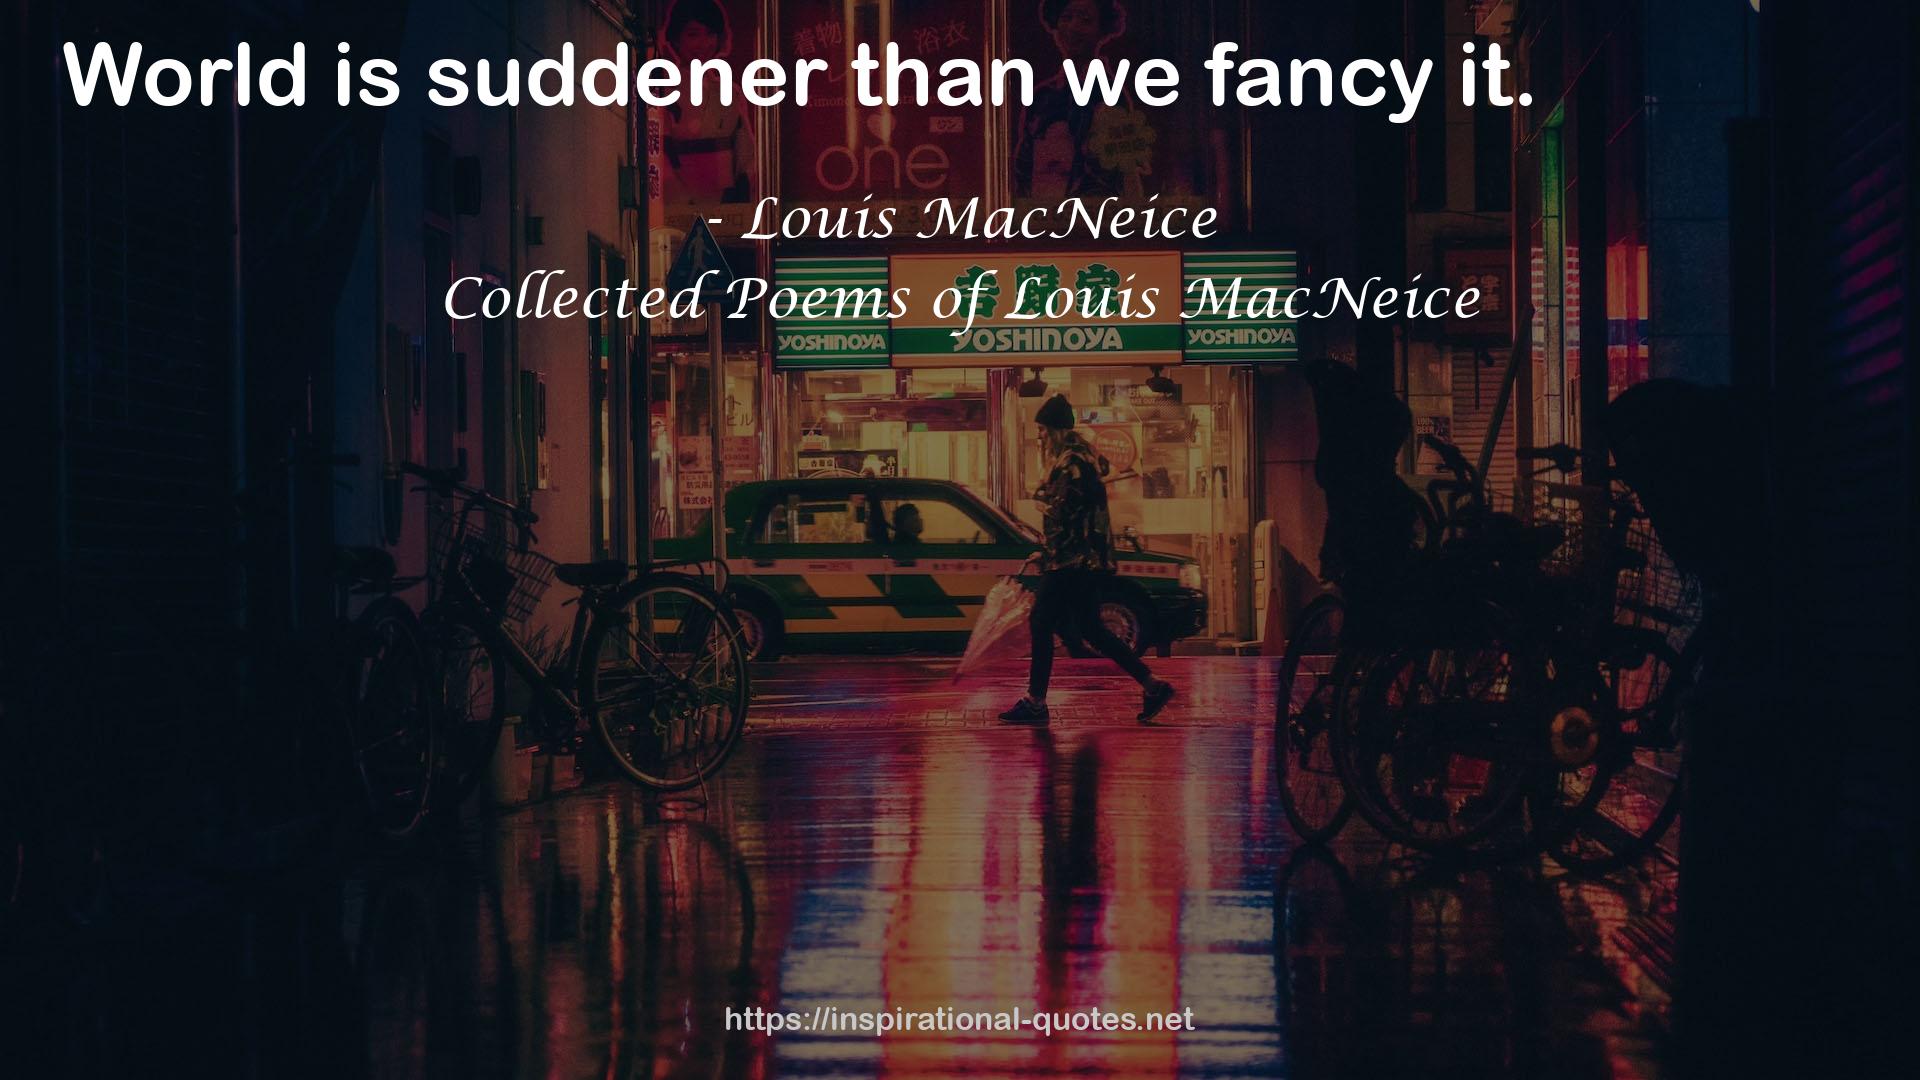 Collected Poems of Louis MacNeice QUOTES